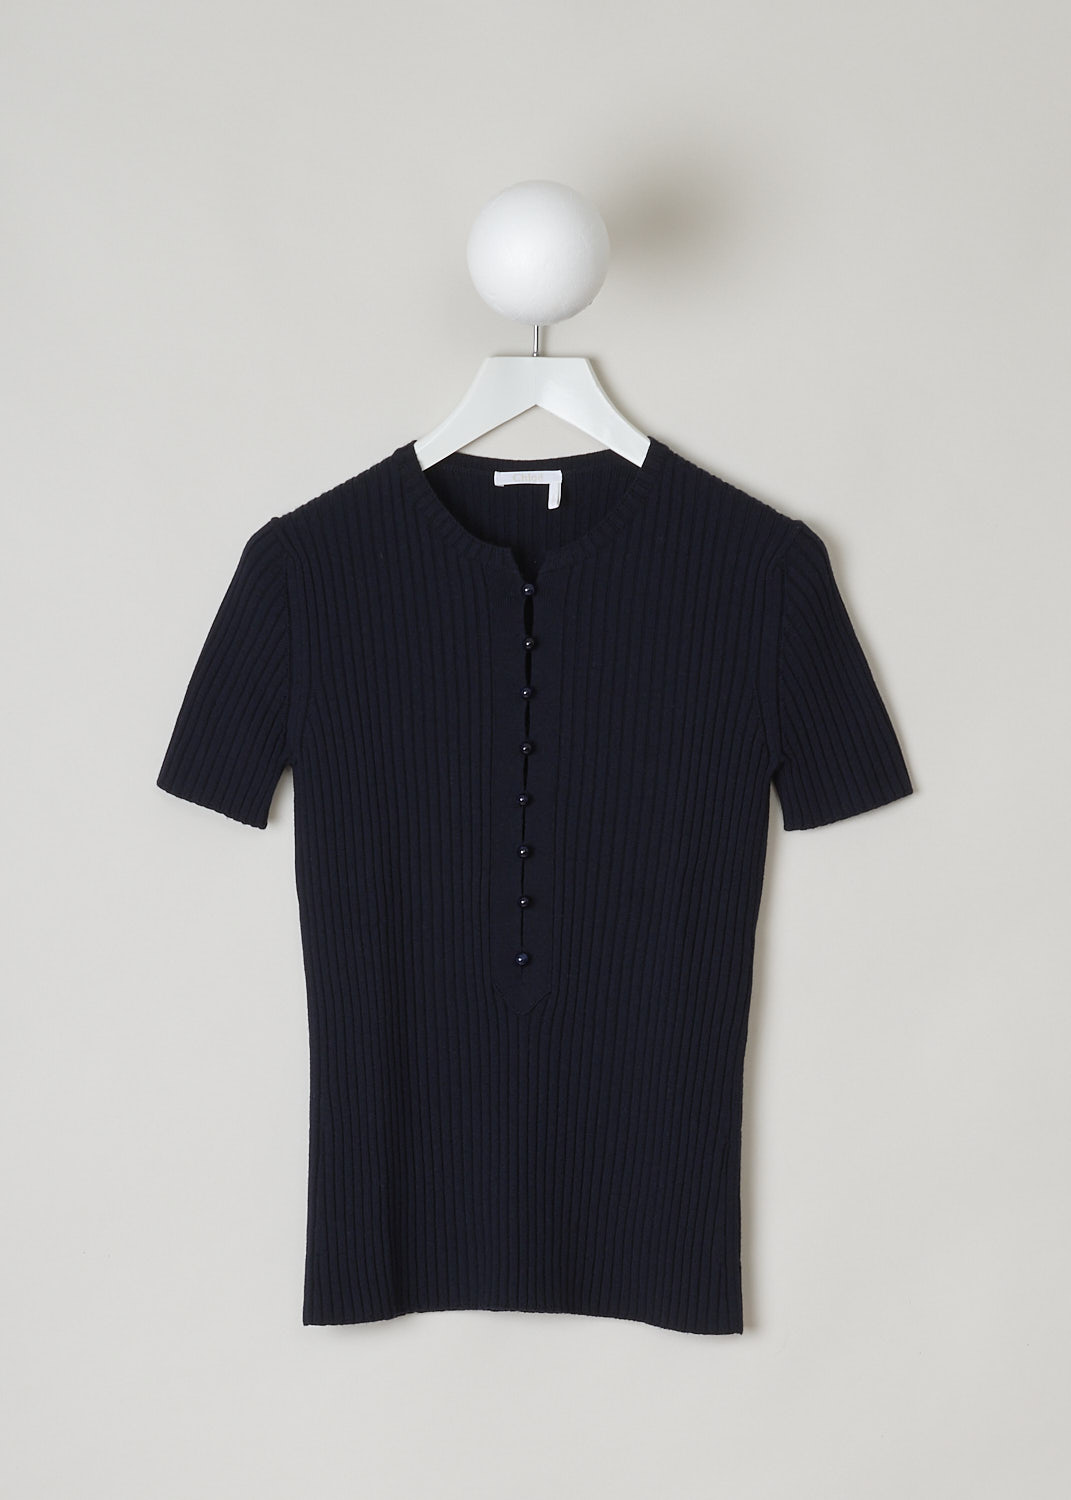 CHLOÃ‰, NAVY BLUE RIBBED TOP, CHC22UMP38650476_DARK_NIGHT_BLUE, Blue, Front, This navy blue ribbed top has a round neckline, short sleeves and a placket with functional ball buttons that go down the front to about midway. The top has an elongated cut.
